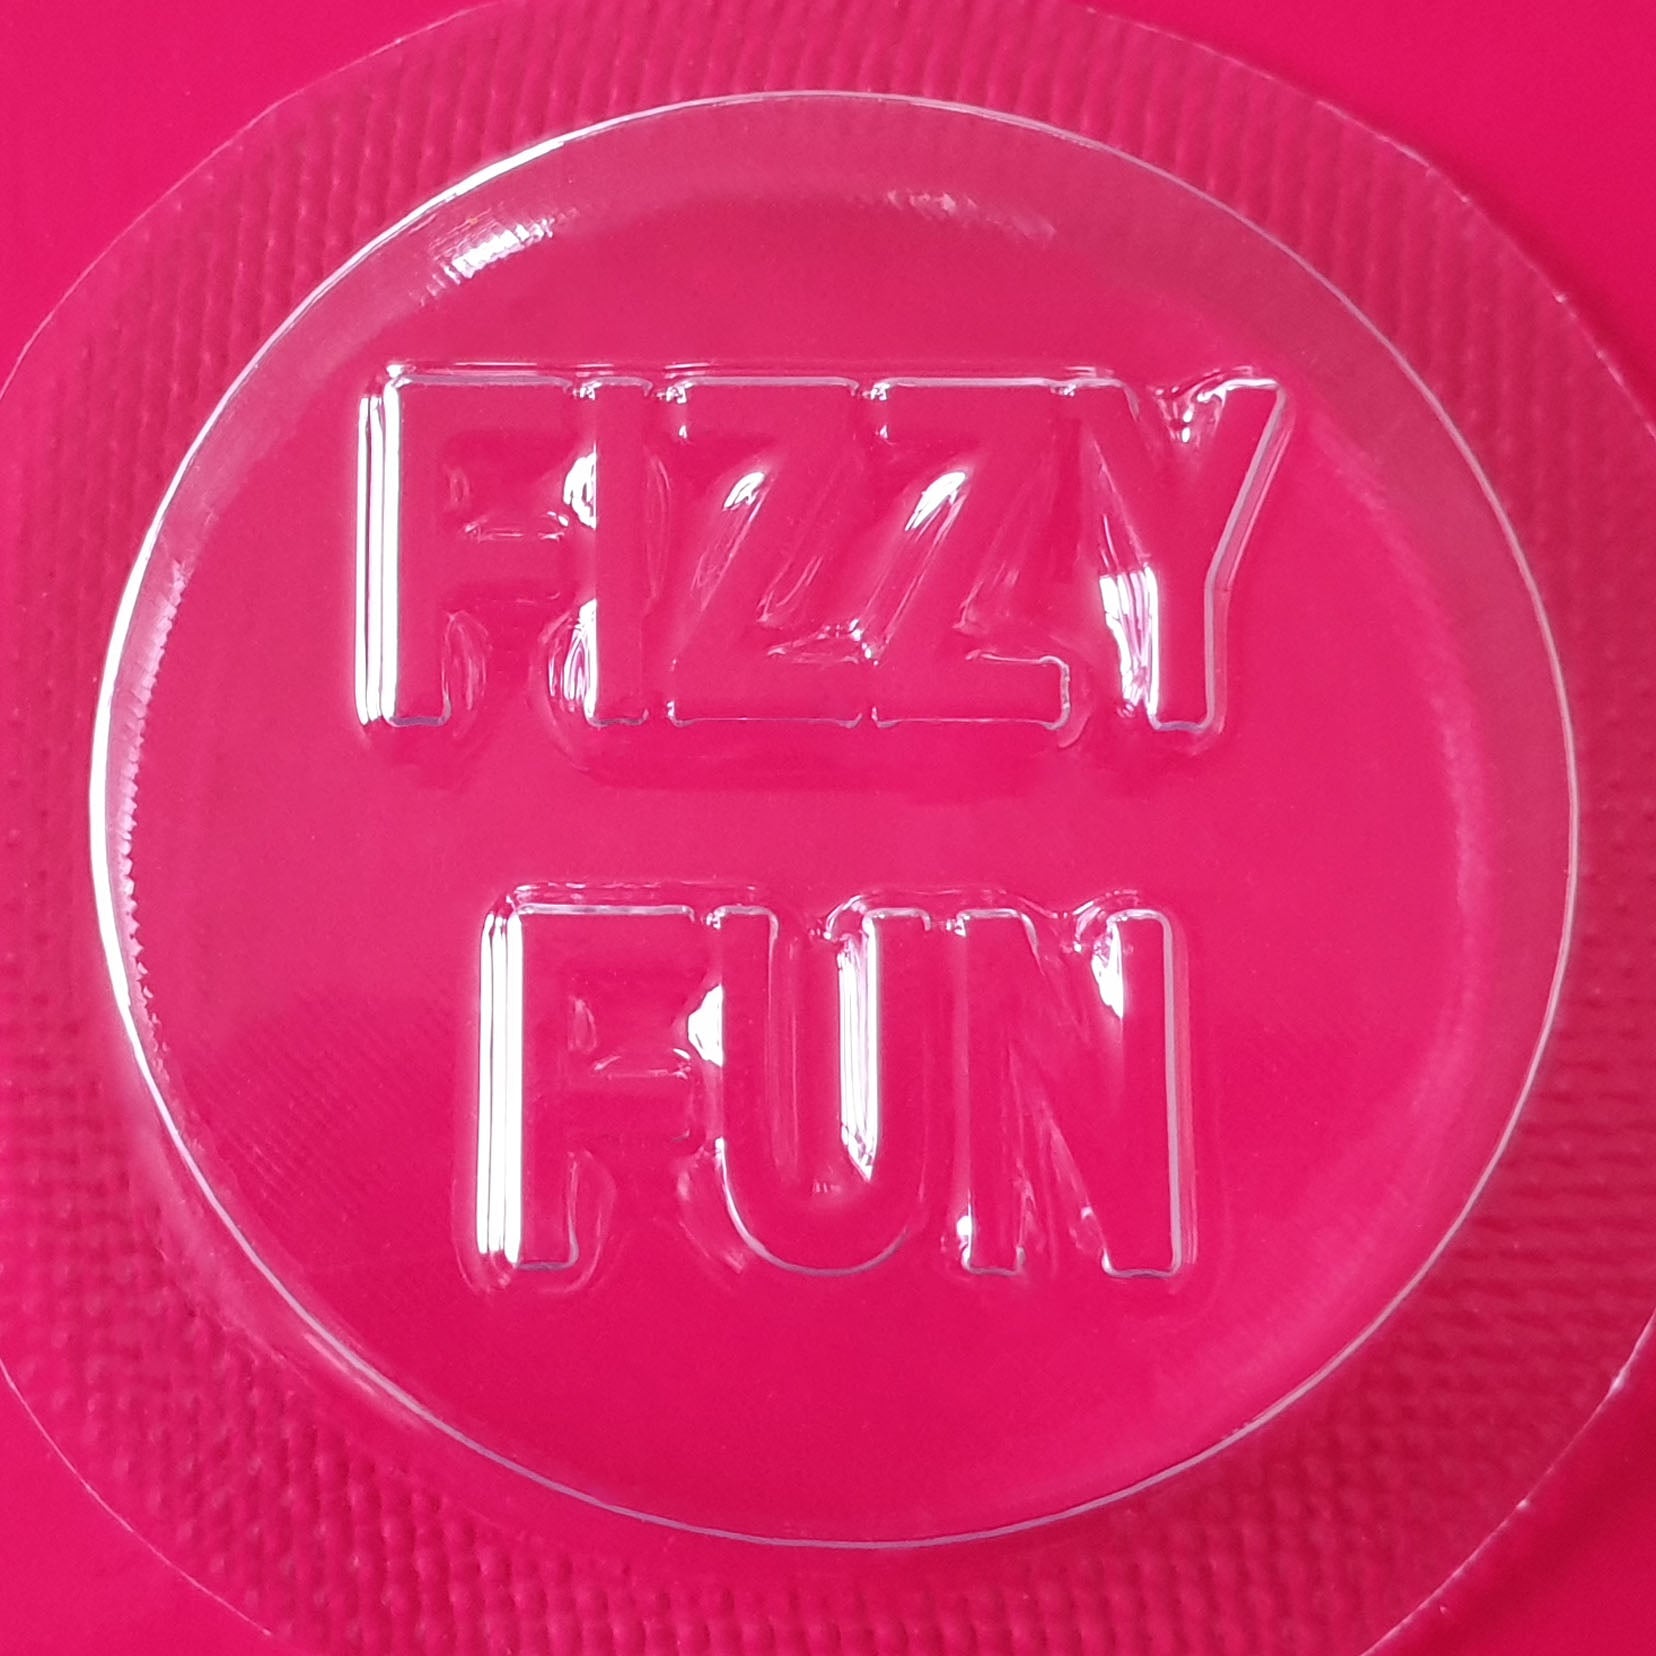 Fizzy Fun Mould | Truly Personal | Bath Bomb, Soap, Resin, Chocolate, Jelly, Wax Melts Mold